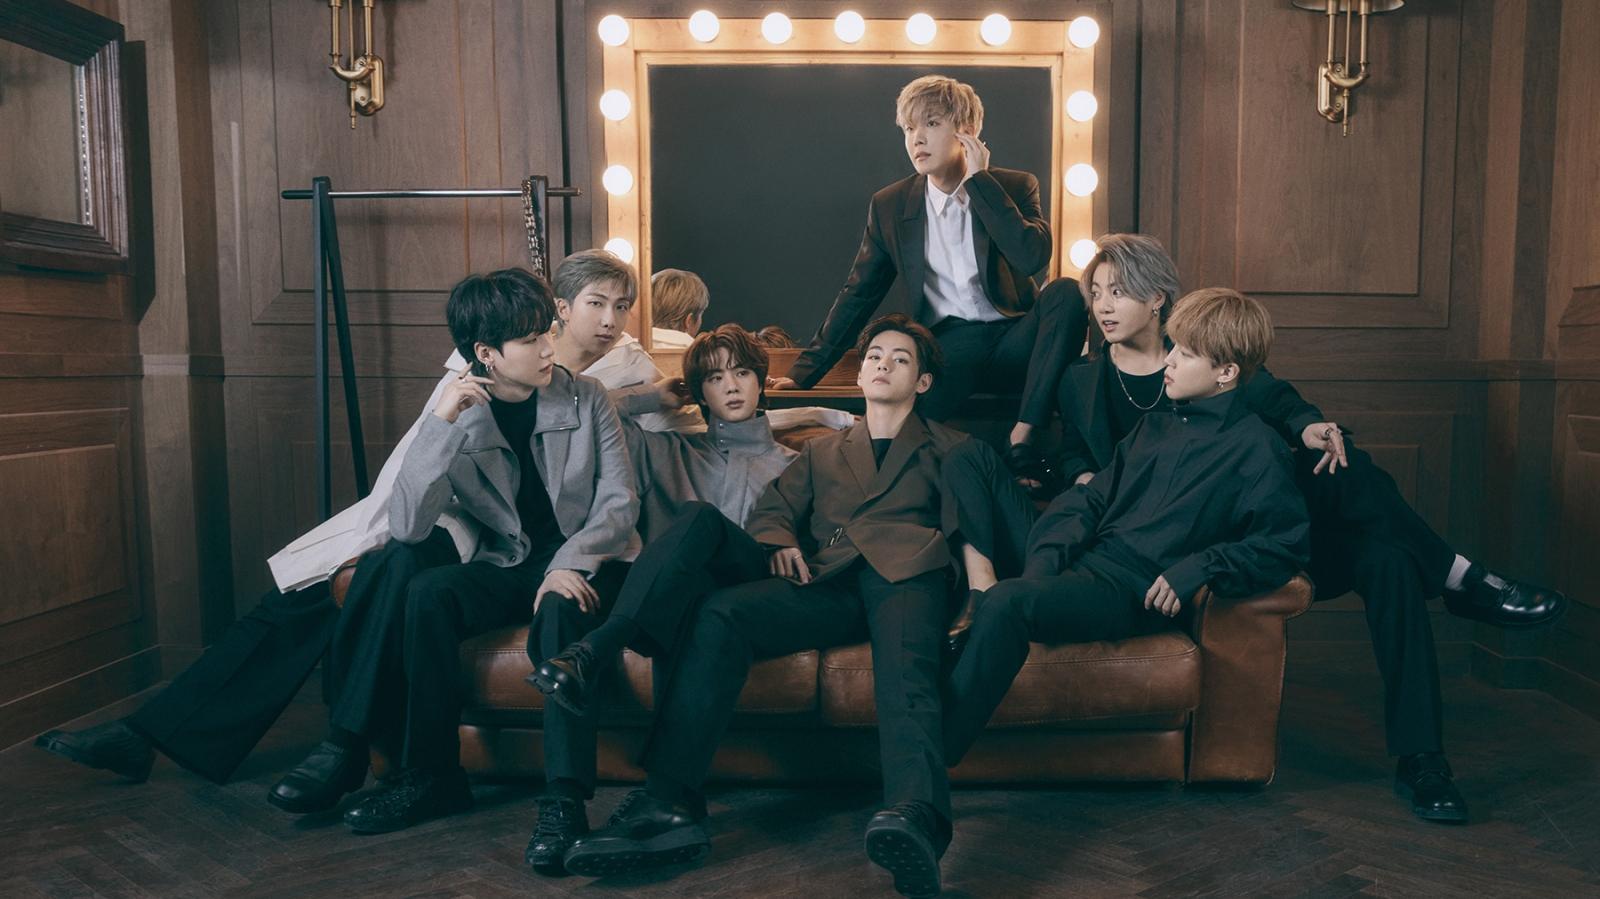 Bts Covers Rolling Stone Magazine June Issue Army Fans